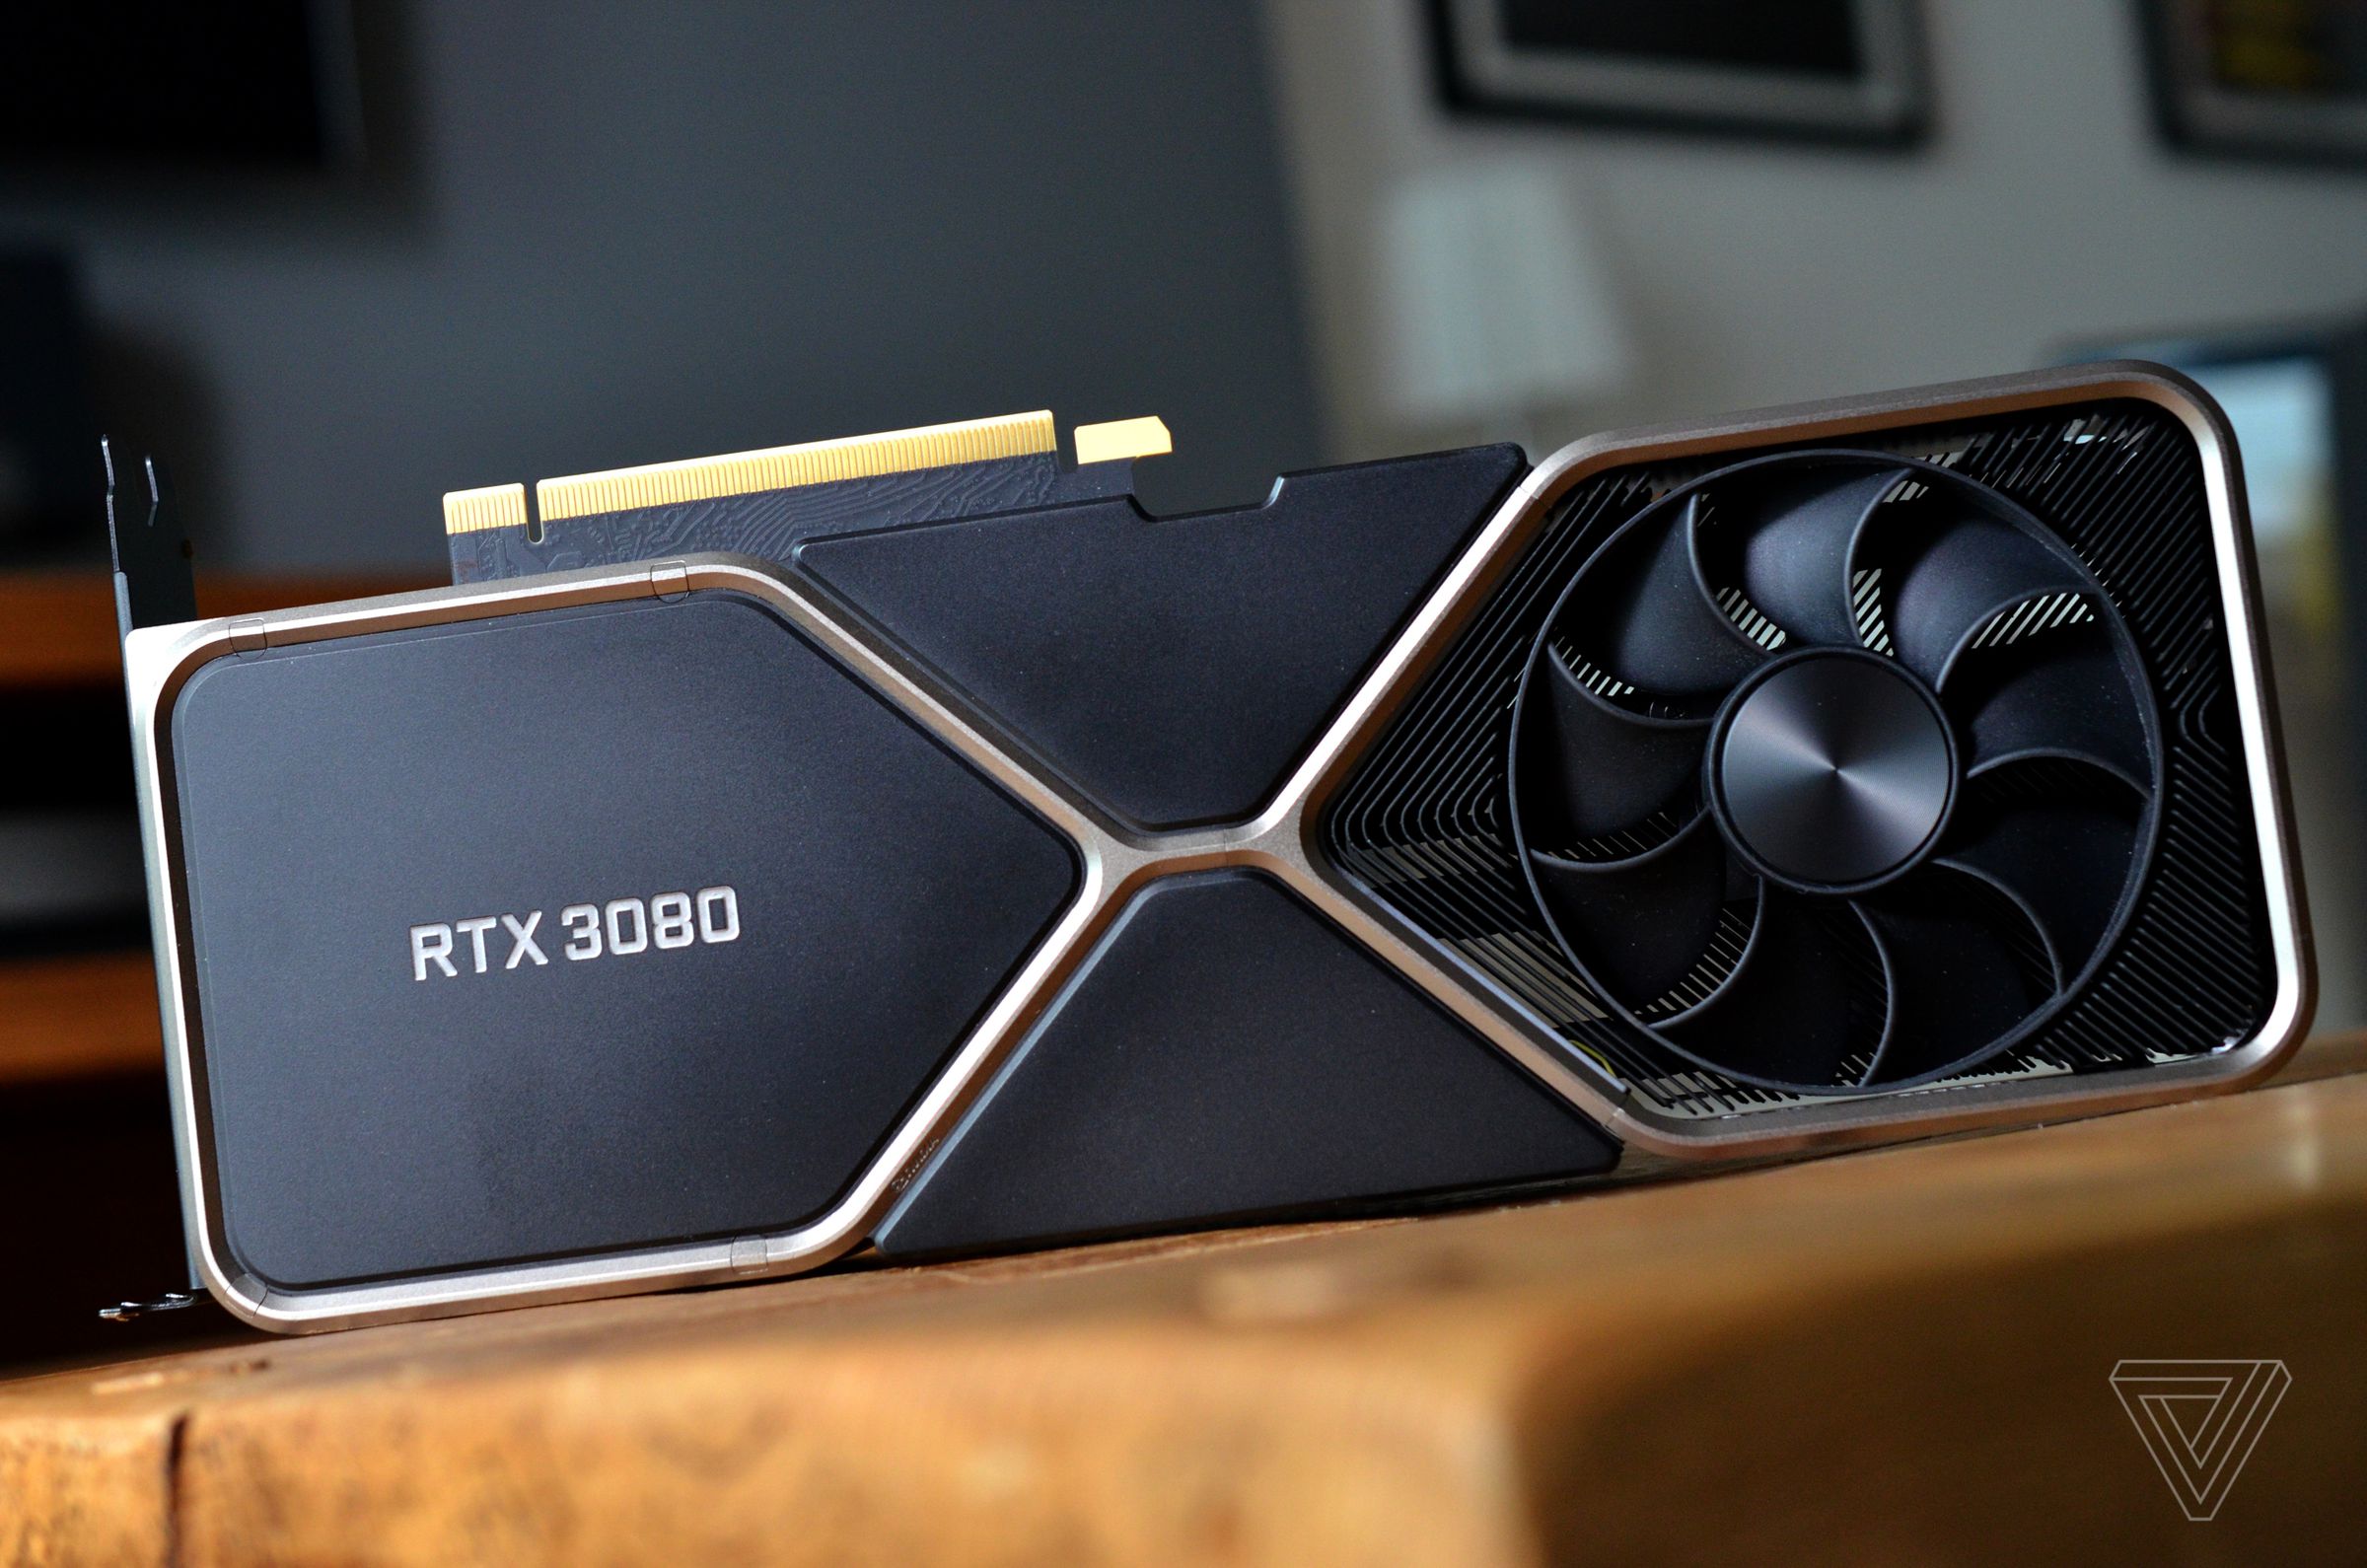 Nvidia’s RTX 3080 has been in high demand.